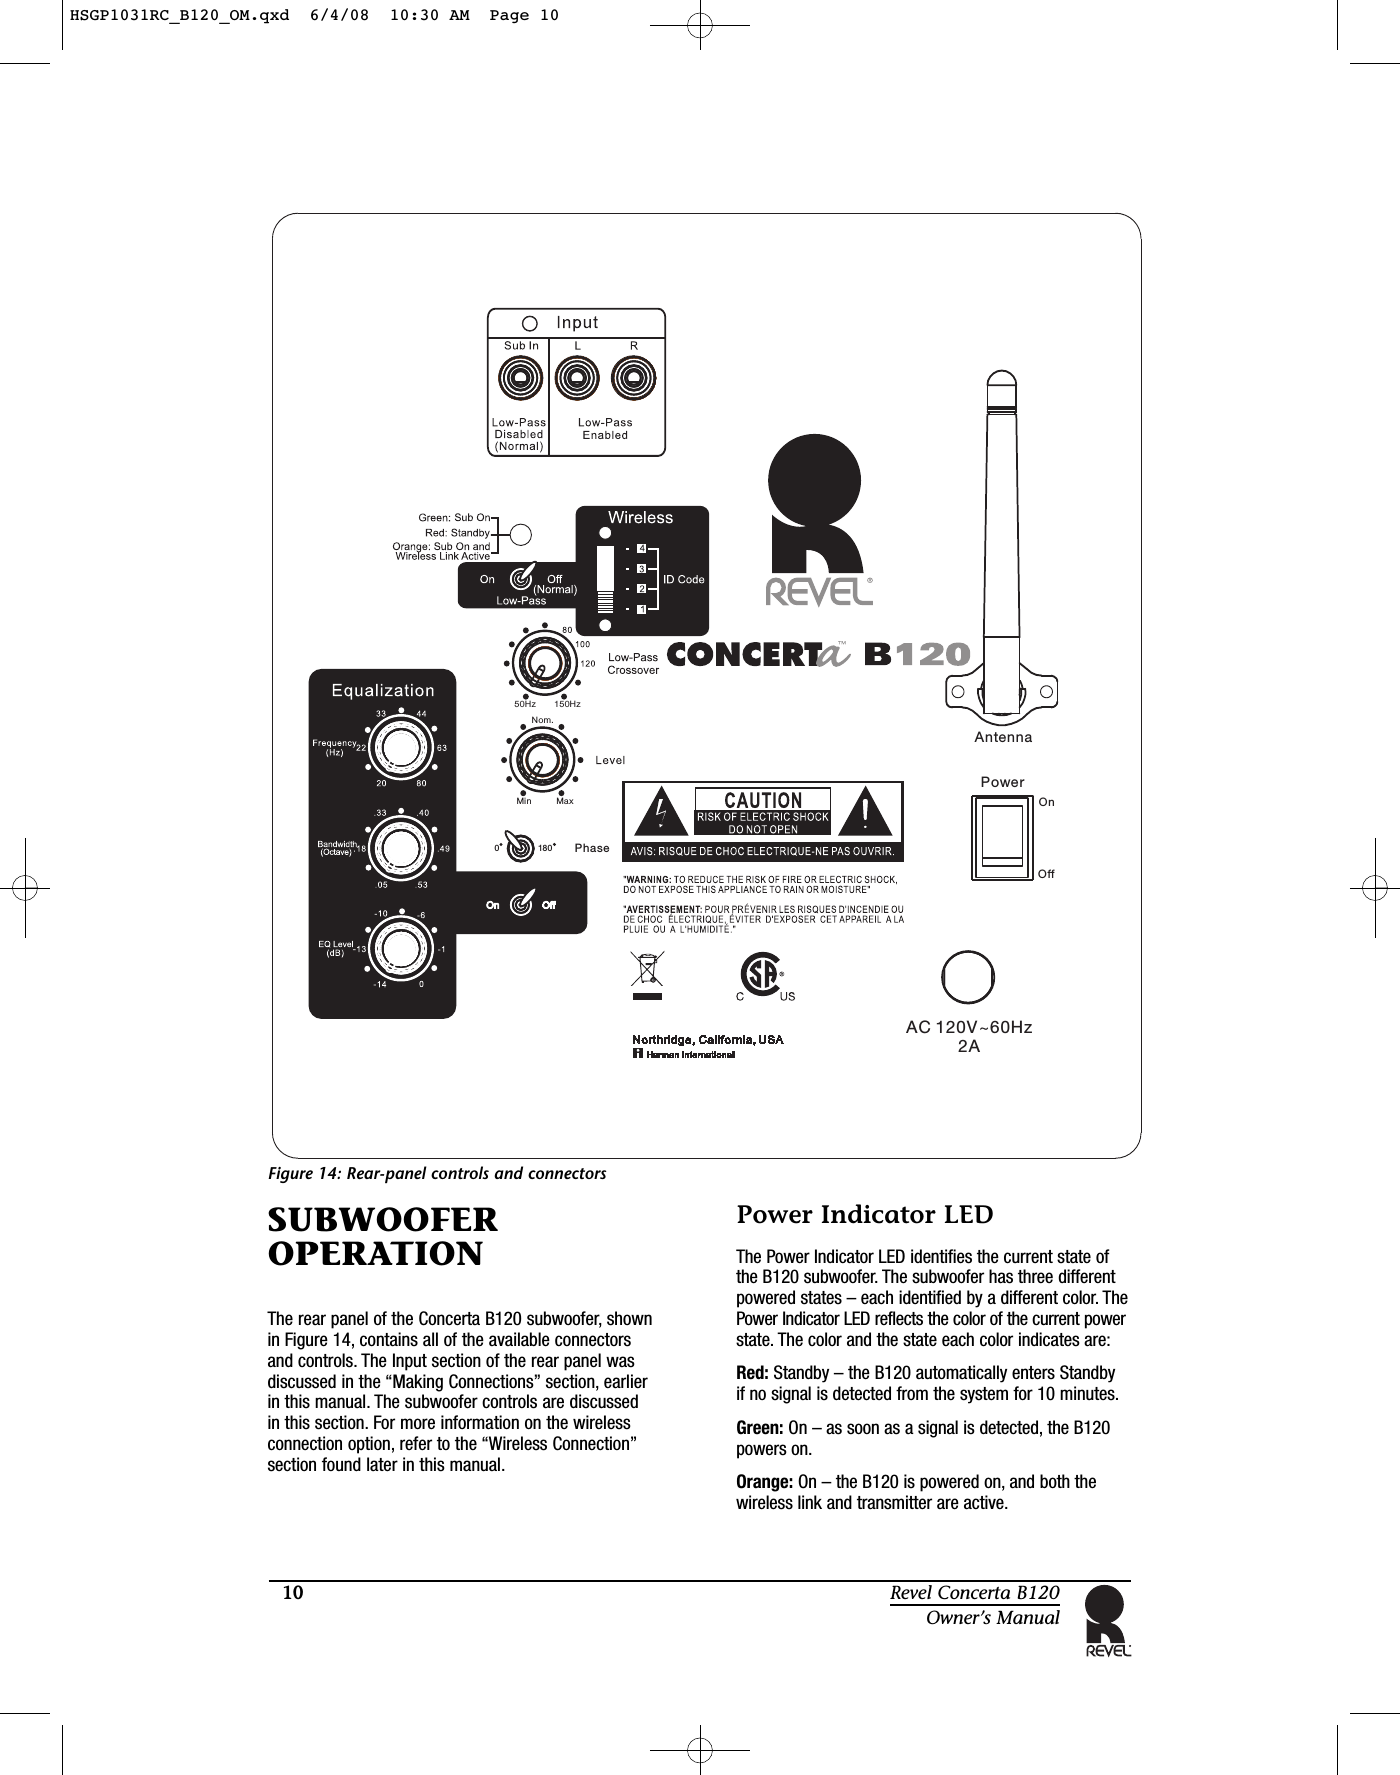 10 Revel Concerta B120Owner’s ManualFigure 14: Rear-panel controls and connectorsSUBWOOFEROPERATIONThe rear panel of the Concerta B120 subwoofer, shownin Figure 14, contains all of the available connectorsand controls. The Input section of the rear panel wasdiscussed in the “Making Connections” section, earlierin this manual. The subwoofer controls are discussed in this section. For more information on the wirelessconnection option, refer to the “Wireless Connection”section found later in this manual.Power Indicator LEDThe Power Indicator LED identifies the current state ofthe B120 subwoofer. The subwoofer has three differentpowered states – each identified by a different color. ThePower Indicator LED reflects the color of the current powerstate. The color and the state each color indicates are:Red: Standby – the B120 automatically enters Standby if no signal is detected from the system for 10 minutes.Green: On – as soon as a signal is detected, the B120powers on.Orange: On – the B120 is powered on, and both thewireless link and transmitter are active.AC 120V~60Hz           2AOnOffPowerAntennaPhase150 zH50HzNom.Min Max0180HSGP1031RC_B120_OM.qxd  6/4/08  10:30 AM  Page 10